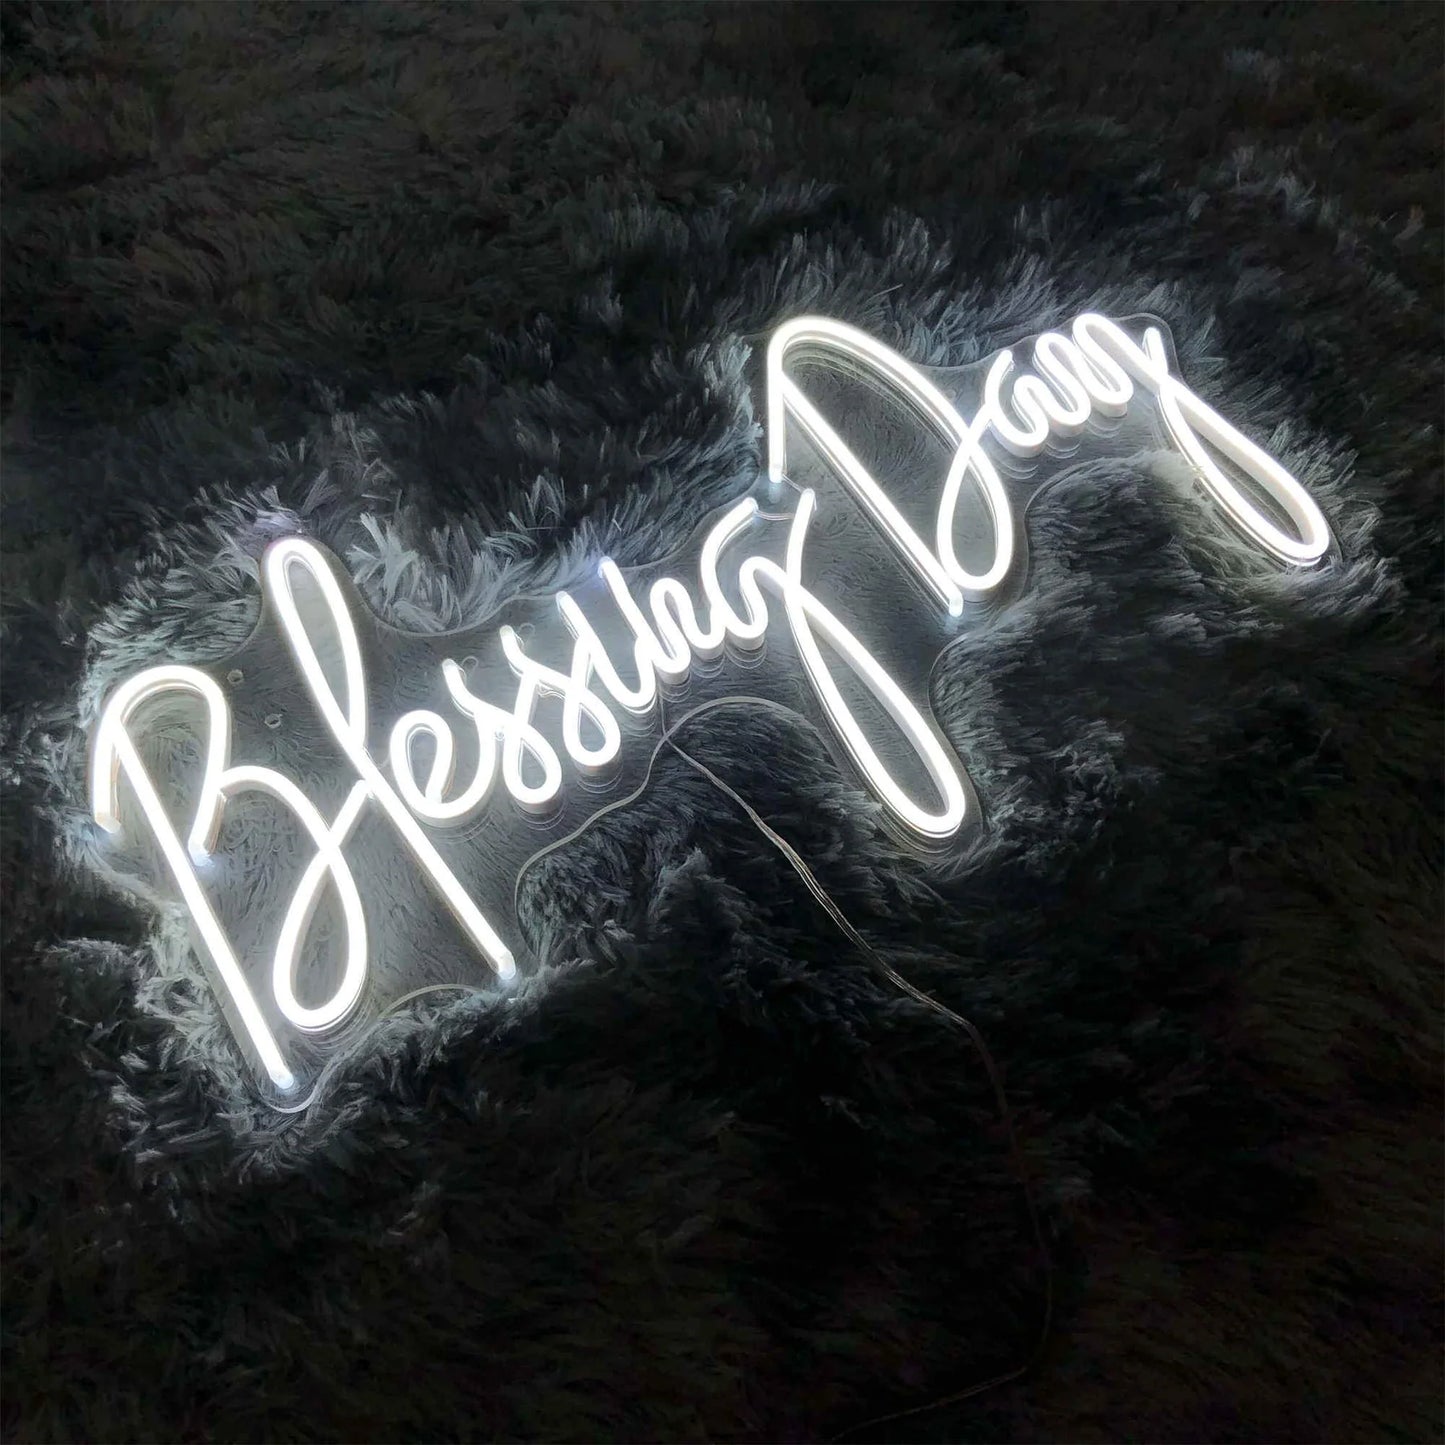 BLESSING DAY NEON WEDDING SIGN LIGHTS